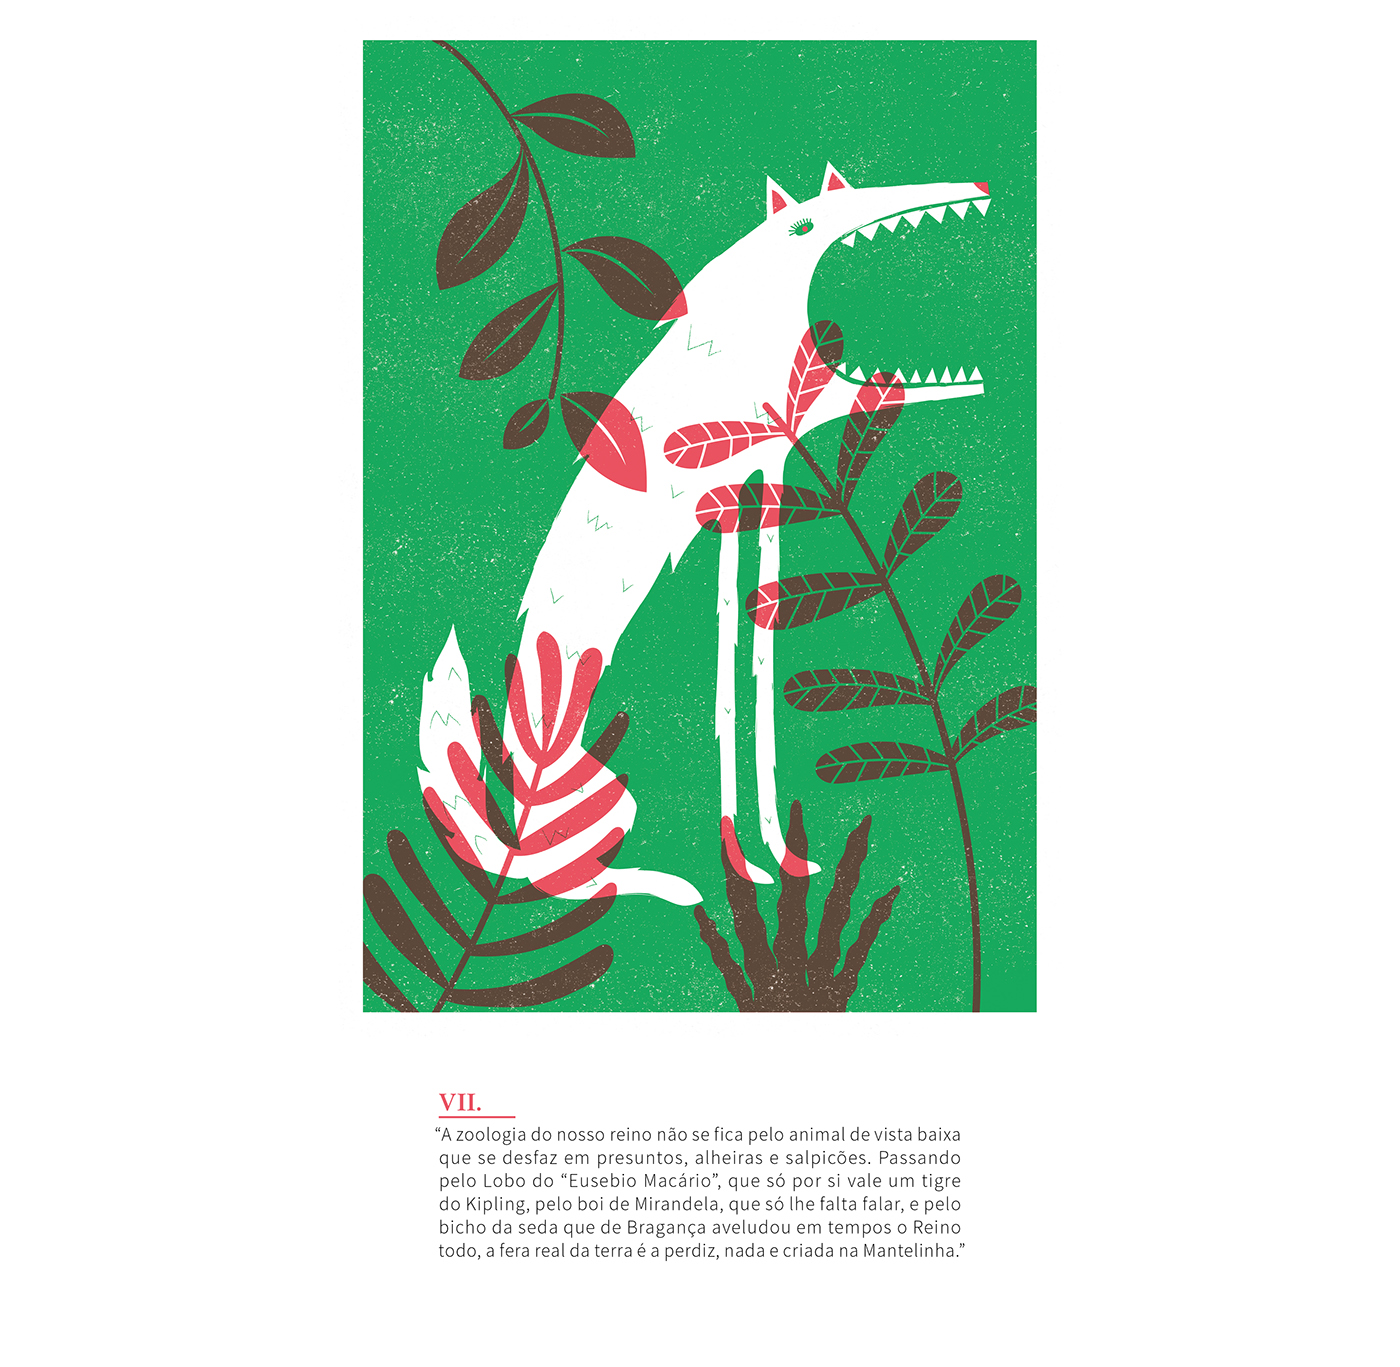 ILLUSTRATION  Exhibition  Wonderful Kingdom risography prints solo show plants Nature red green